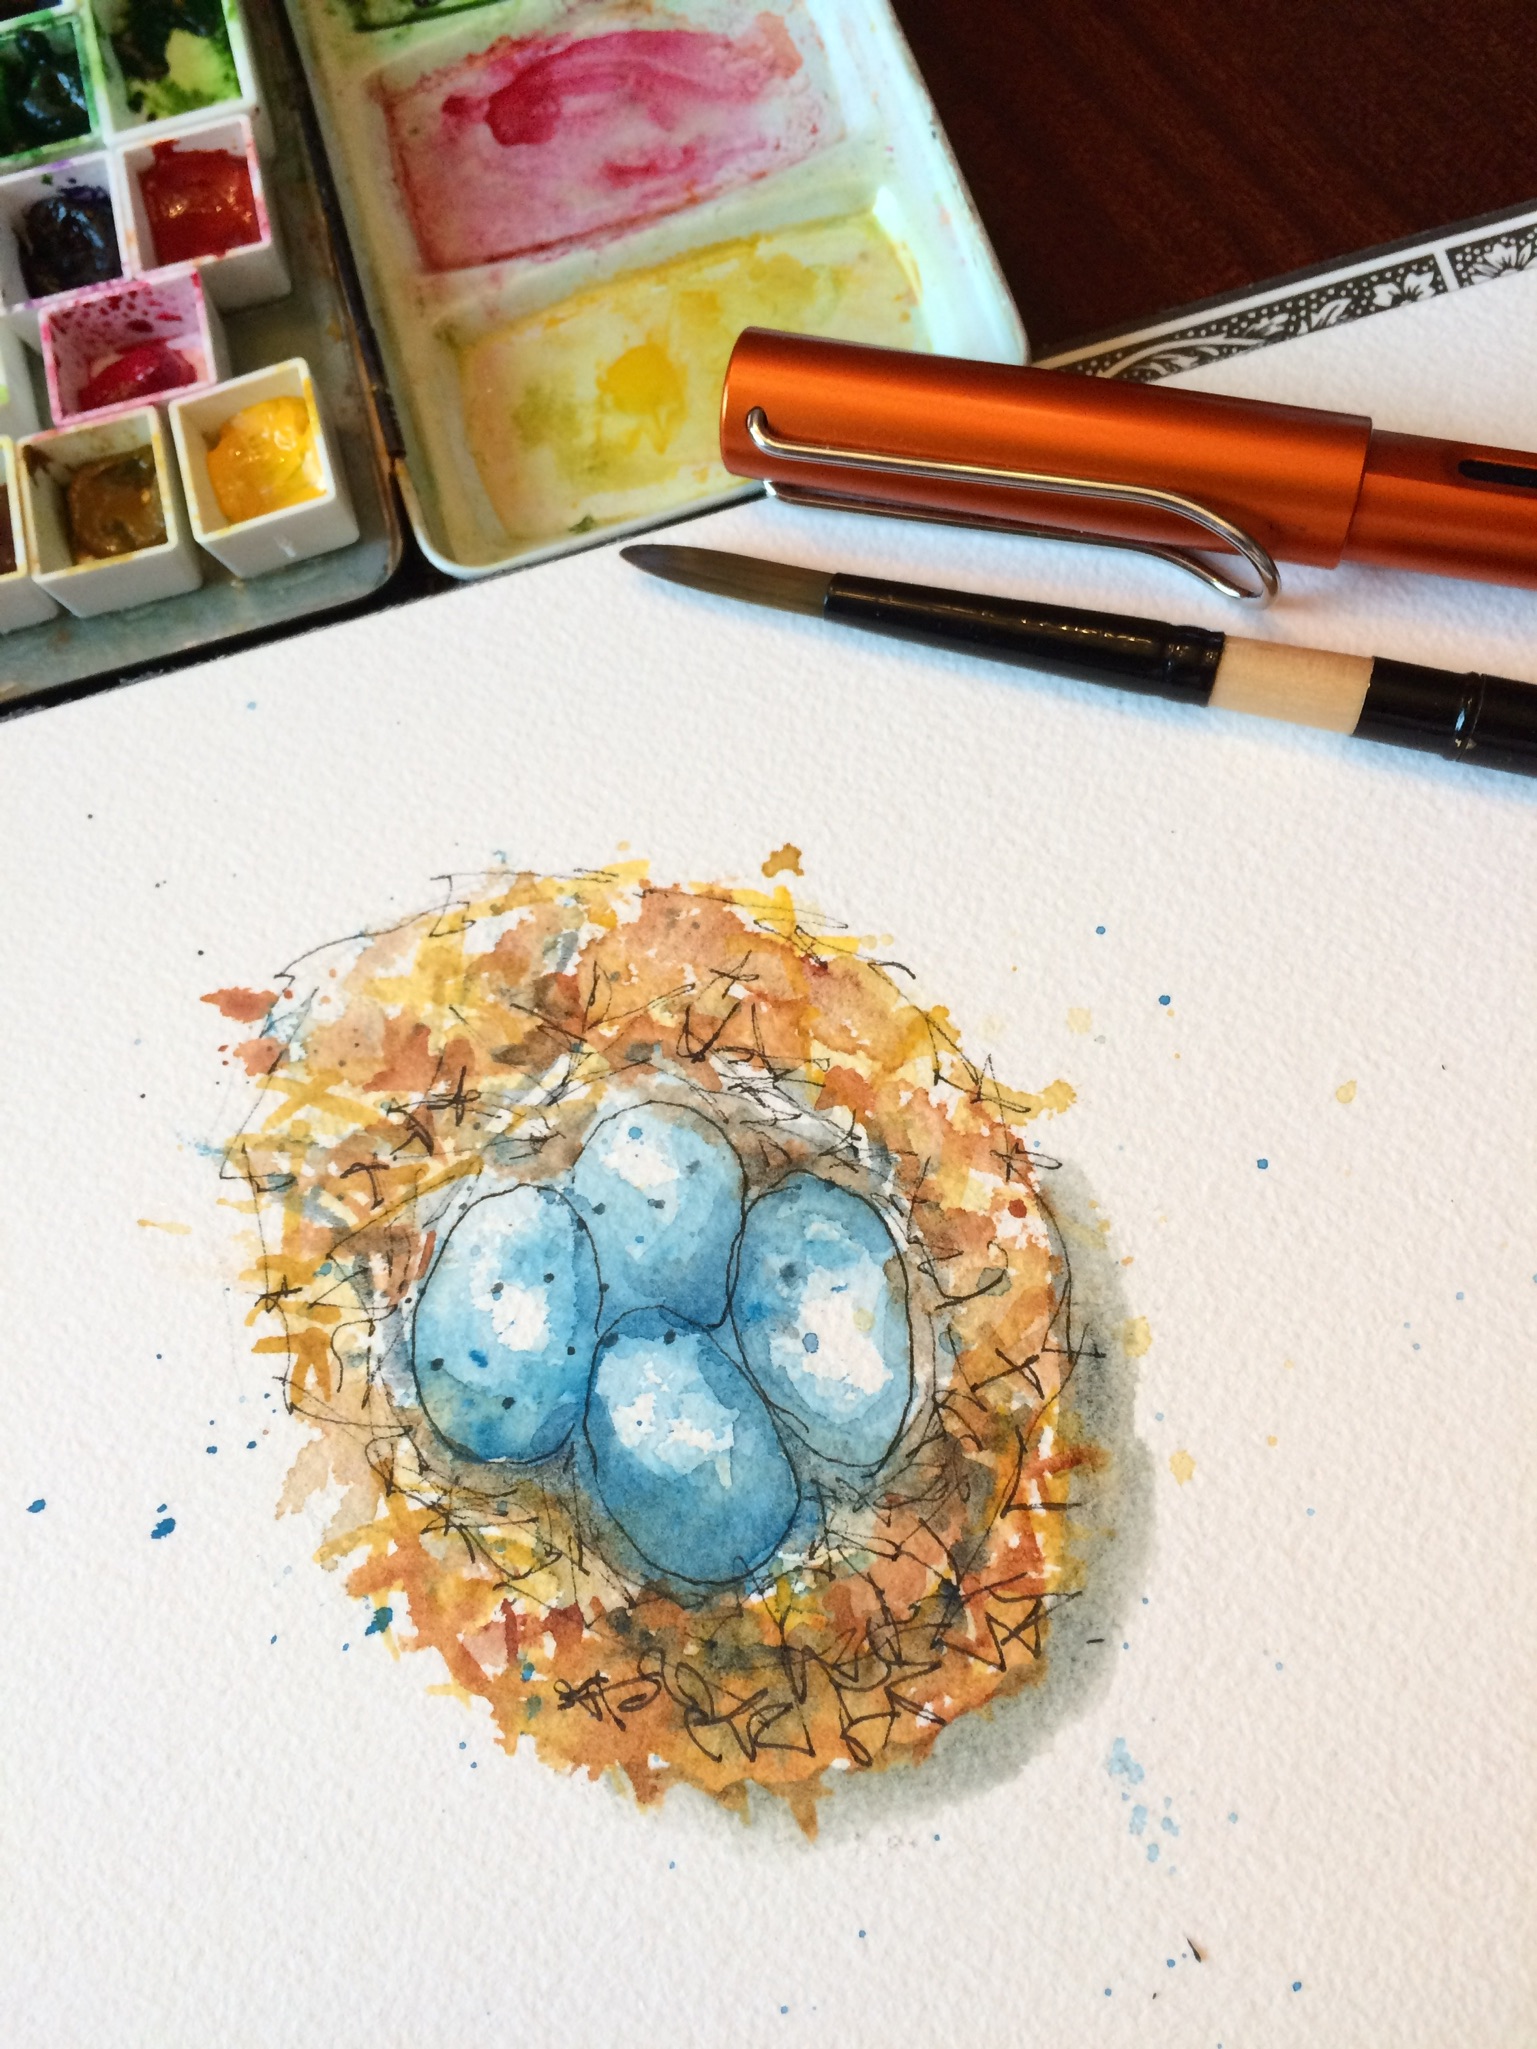 Robins nest with eggs